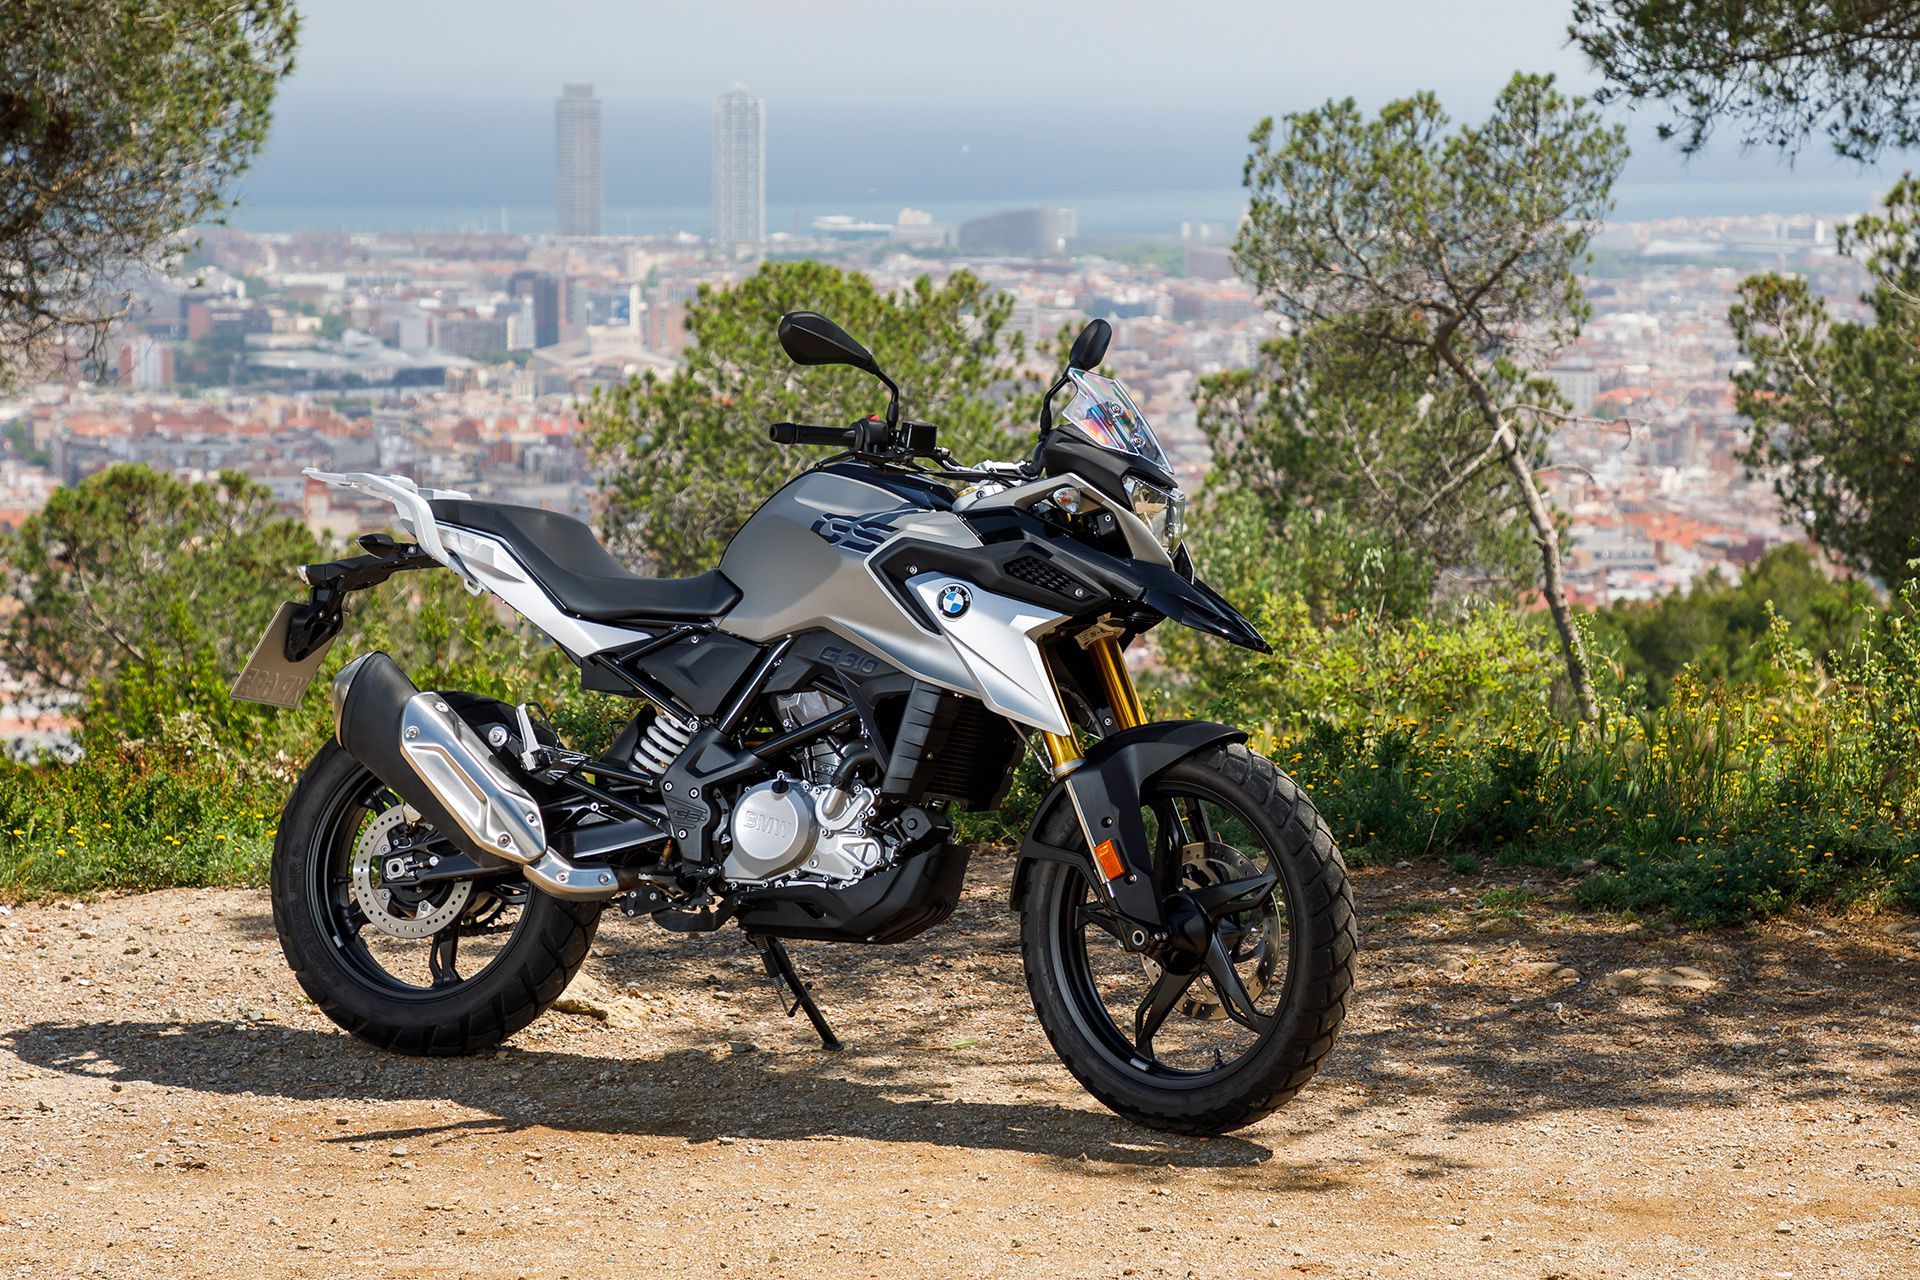 BMW G 310 GS Review Entry Level & Commuter Motorcycle